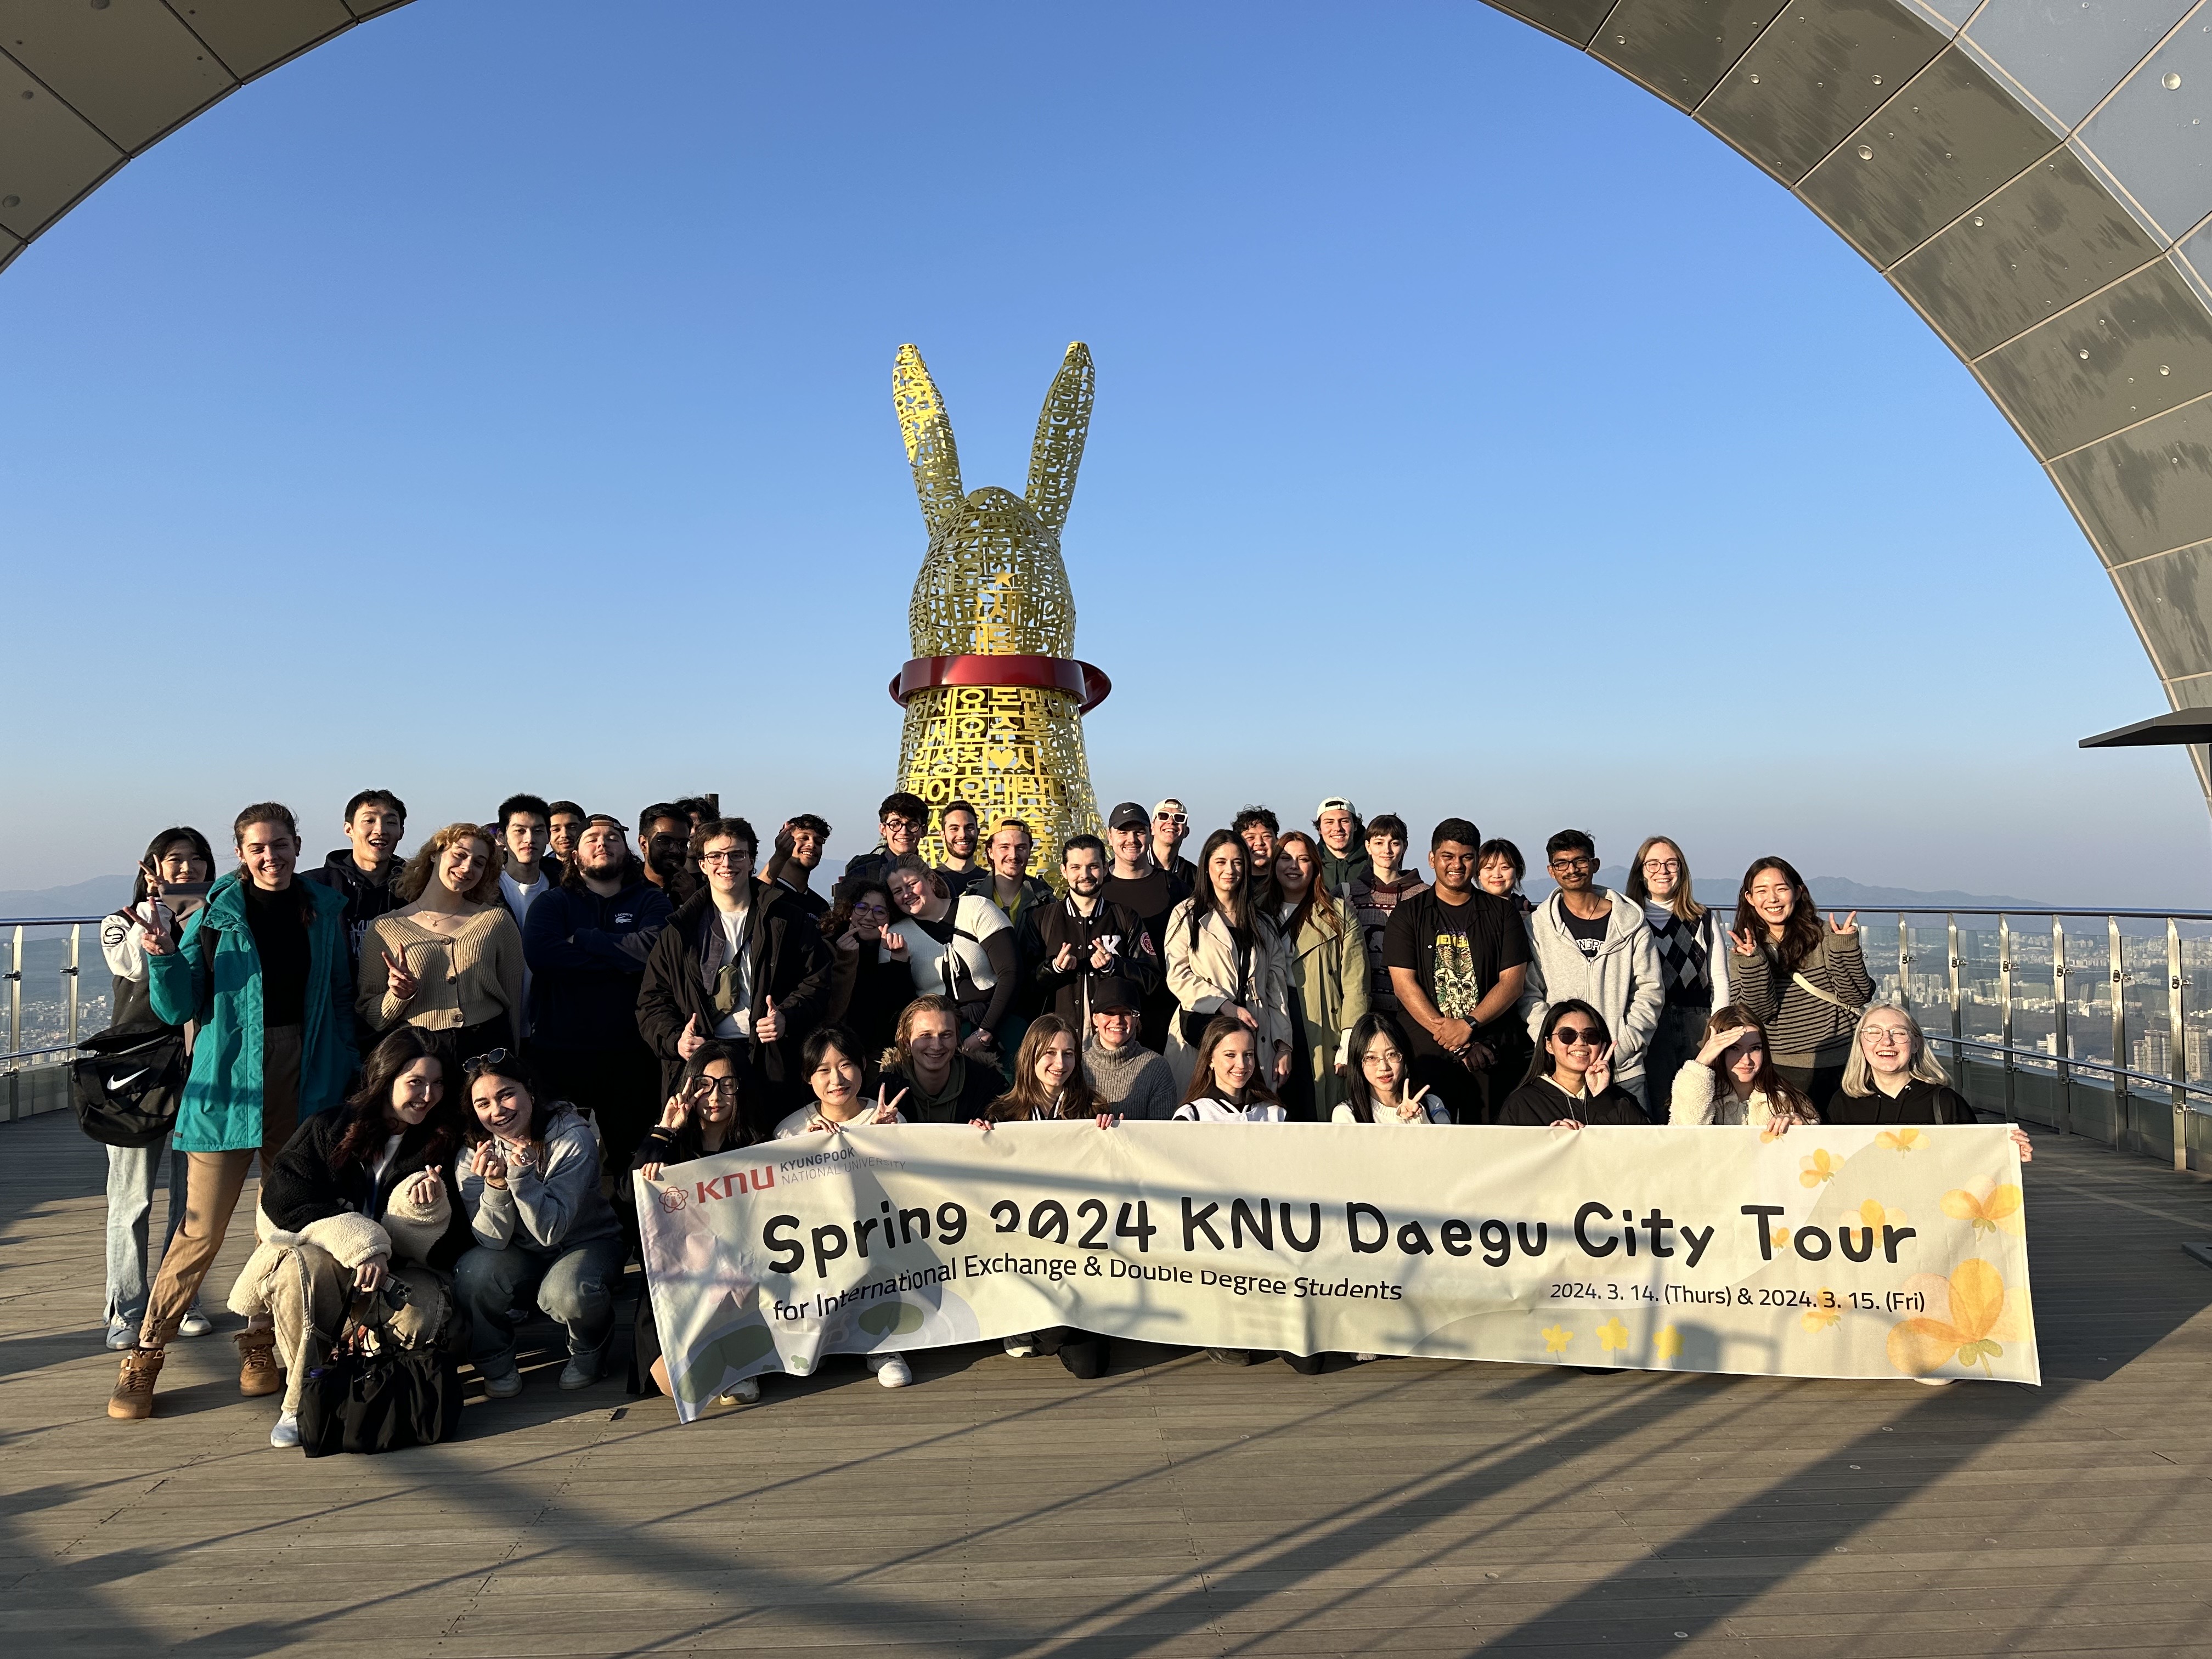 2024 Spring Daegu City Tour for KNU International exchange and double degree students 관련 이미지입니다